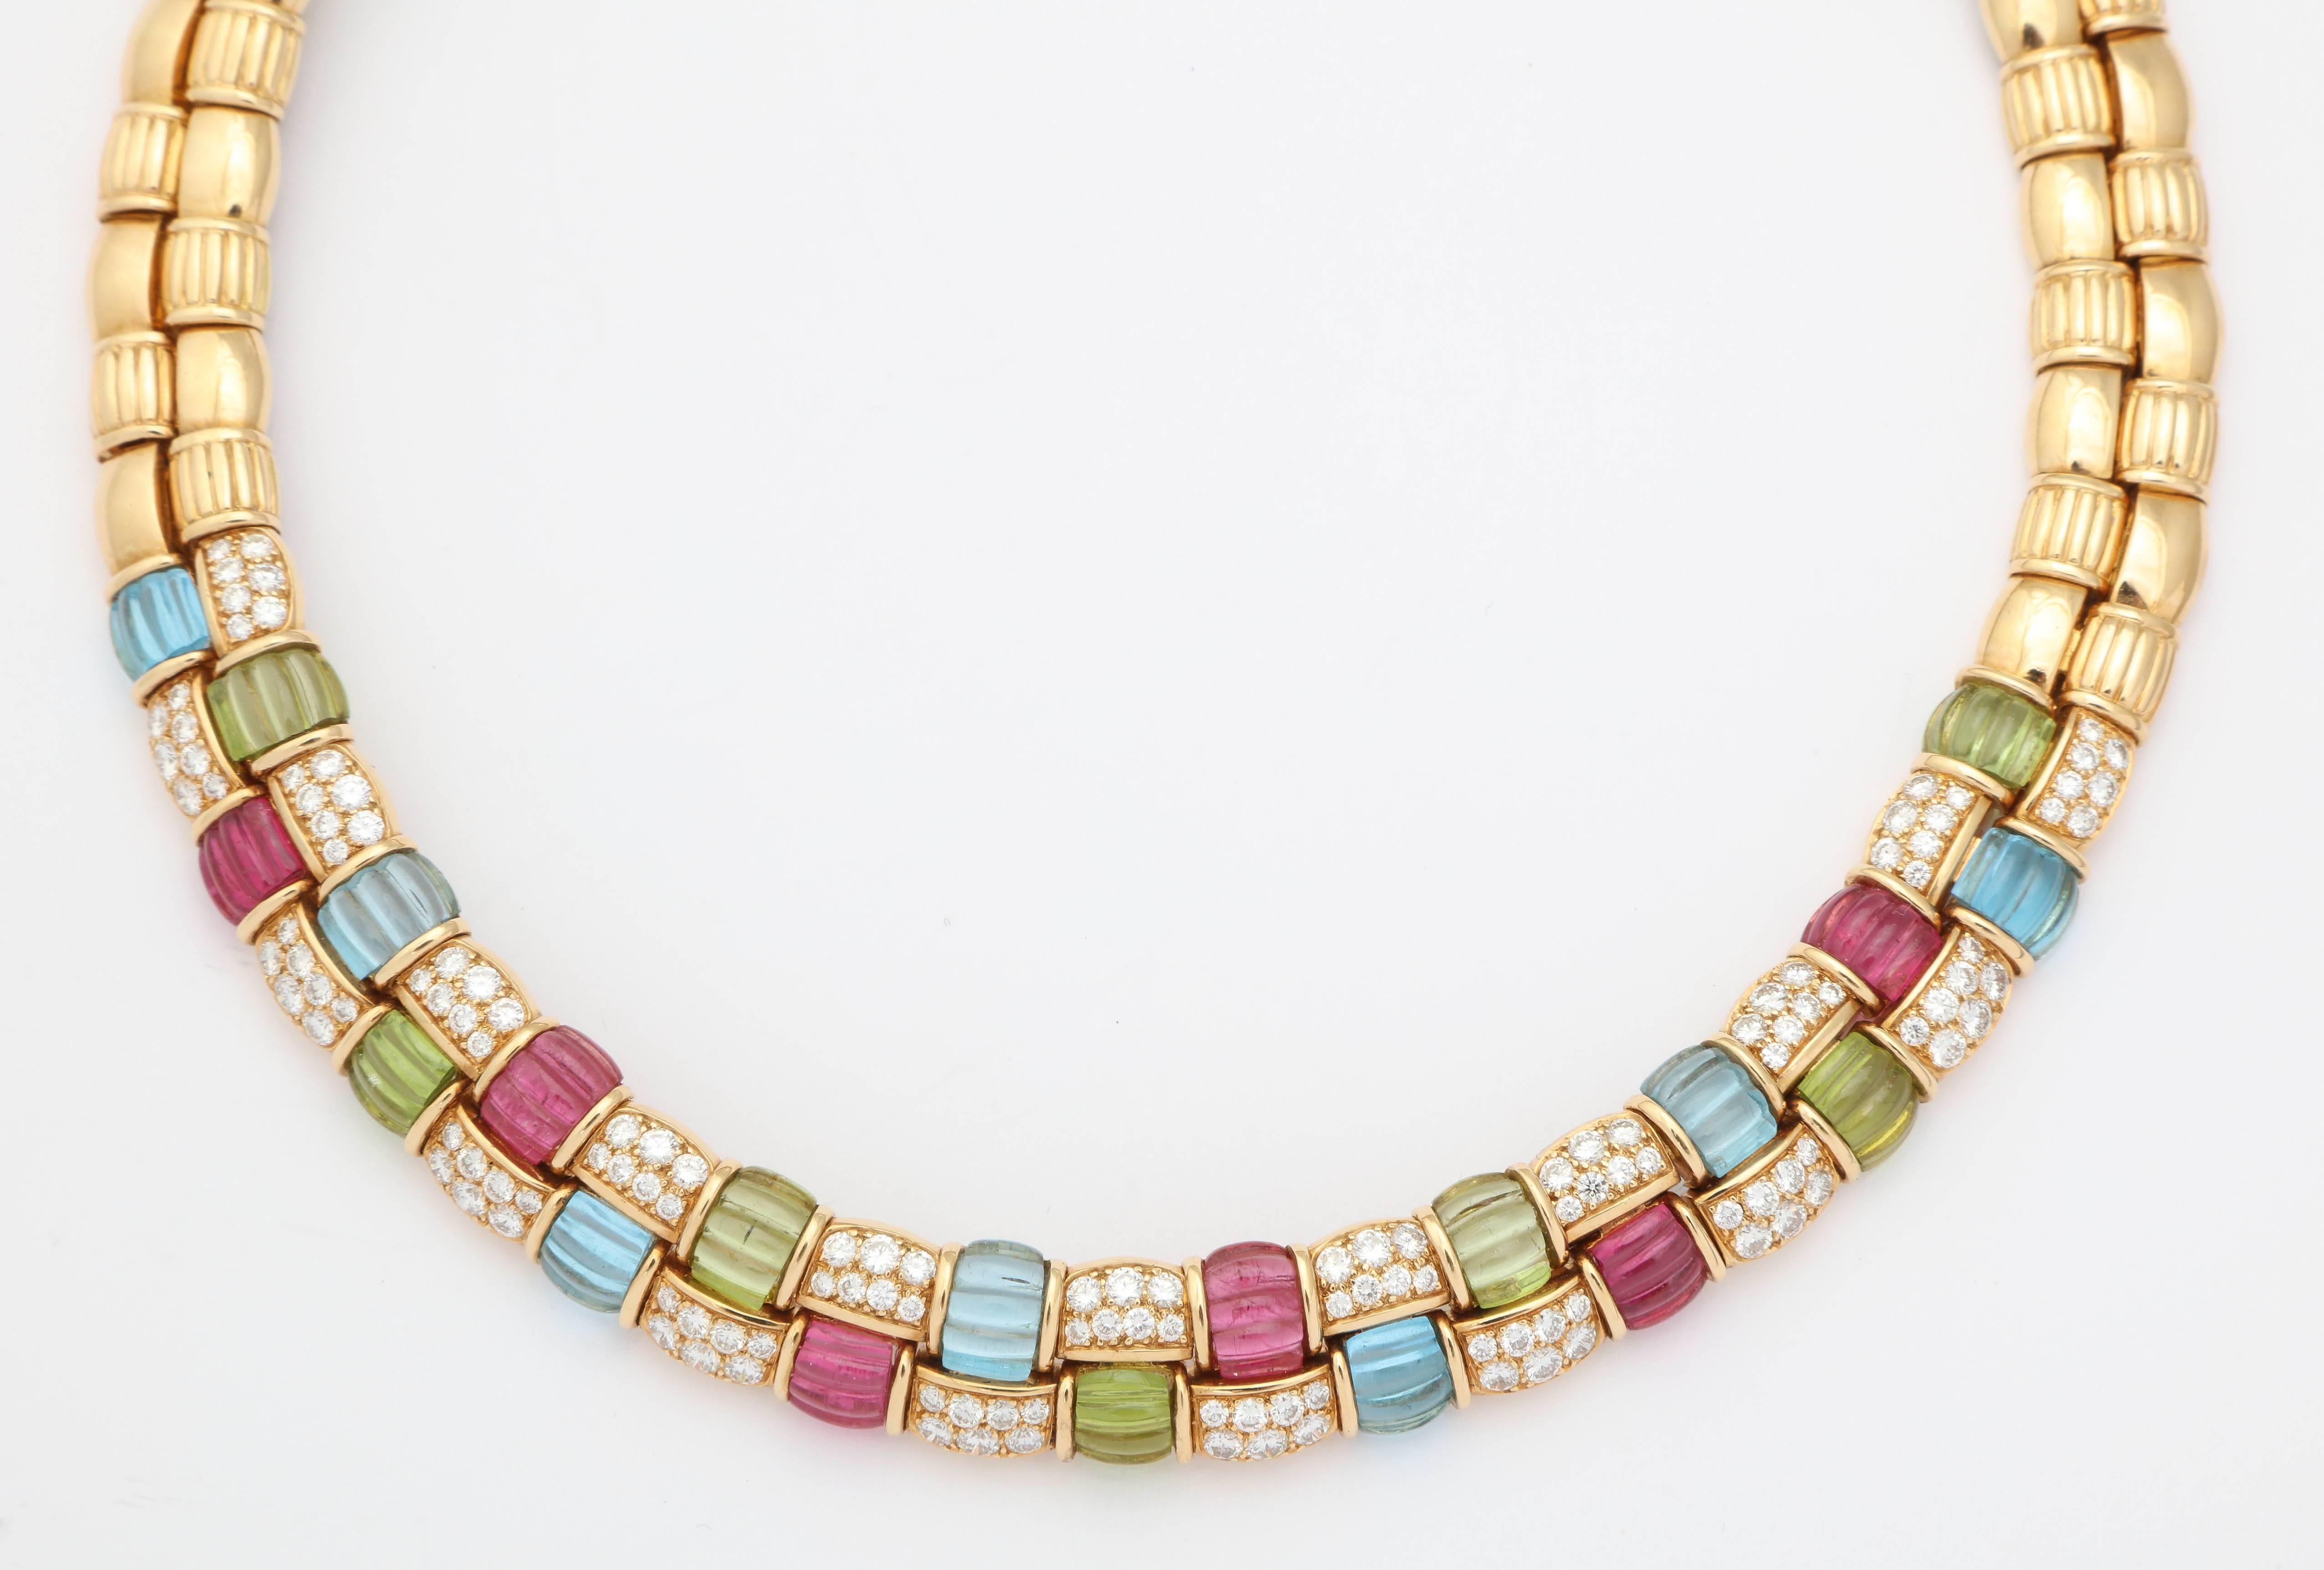 18kt  double row necklace set with Rubellite,  Peridot, and Blue Topaz  ribbed stones and very clean  - full cut, white Diamonds.  A  slender colorful ribbon = clean,  and sumptuous - an era past but not over yet.  
